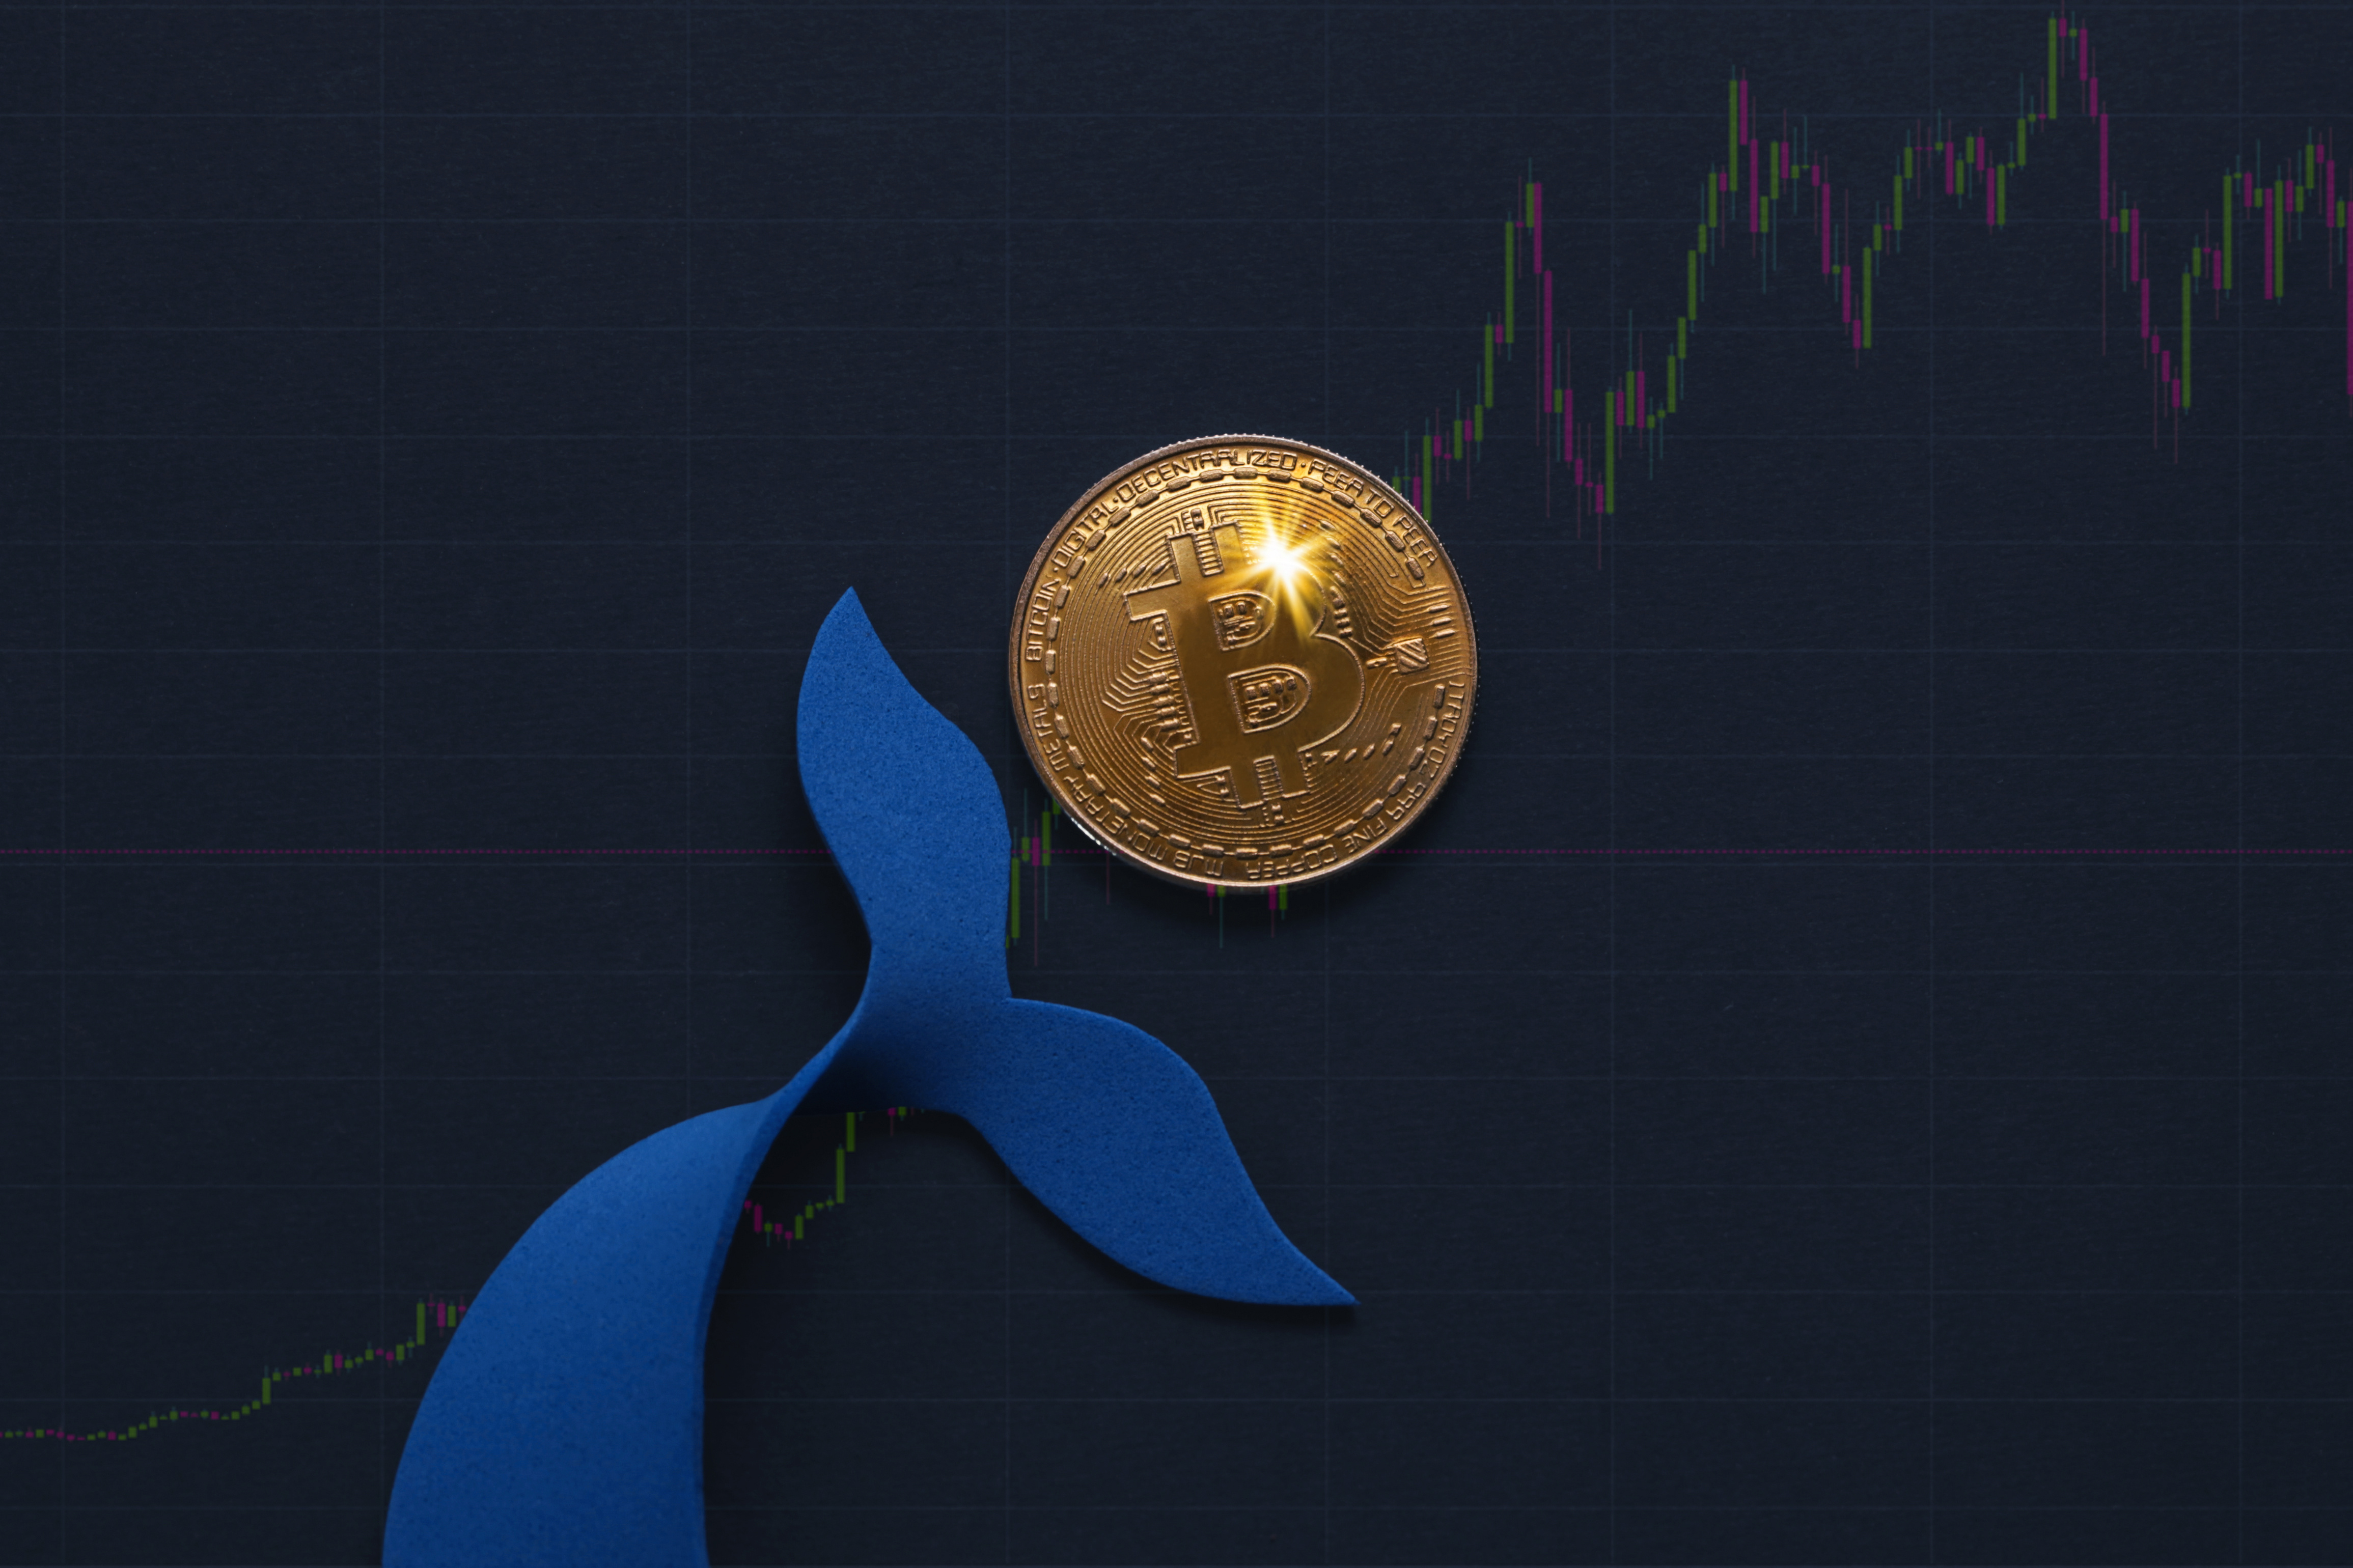 BTC Whales Create Genius Plan to Curb Losses, Analyst Says